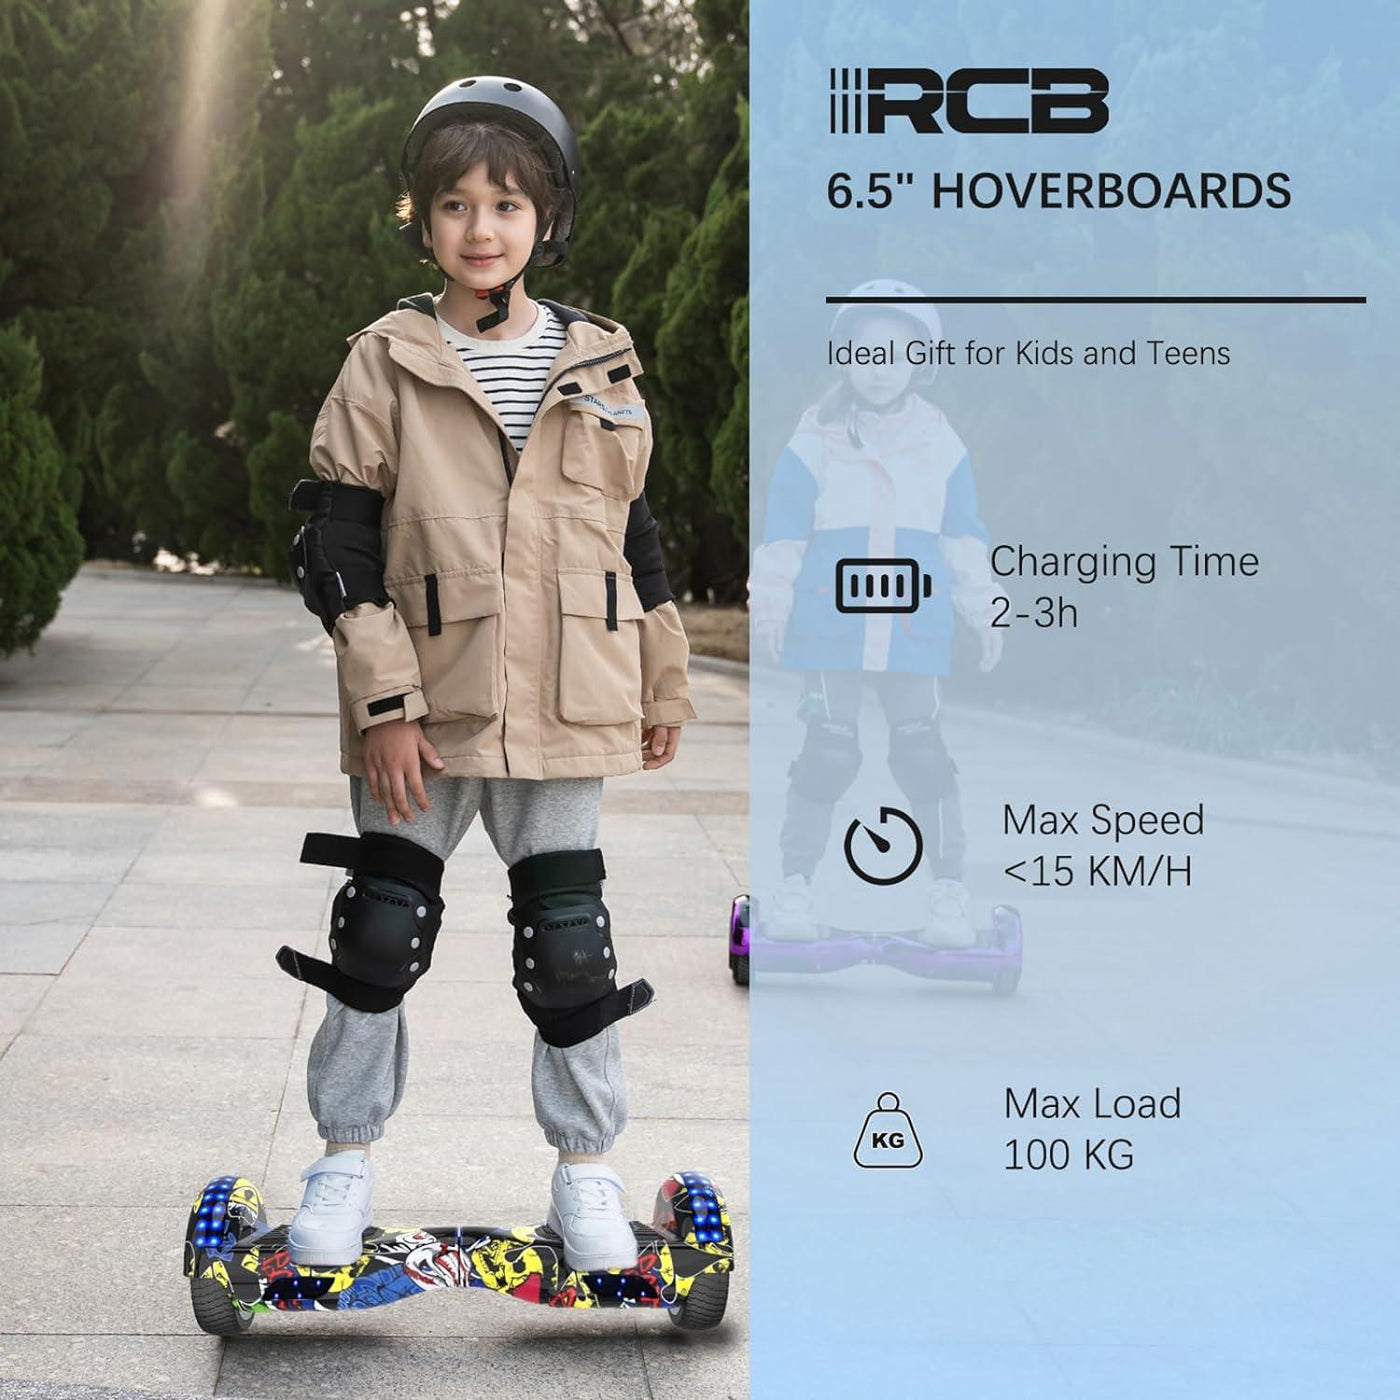 RCB Hoverboards 6.5 inch with Bluetooth, Speaker, Colorful LED Lights - Massive Discounts